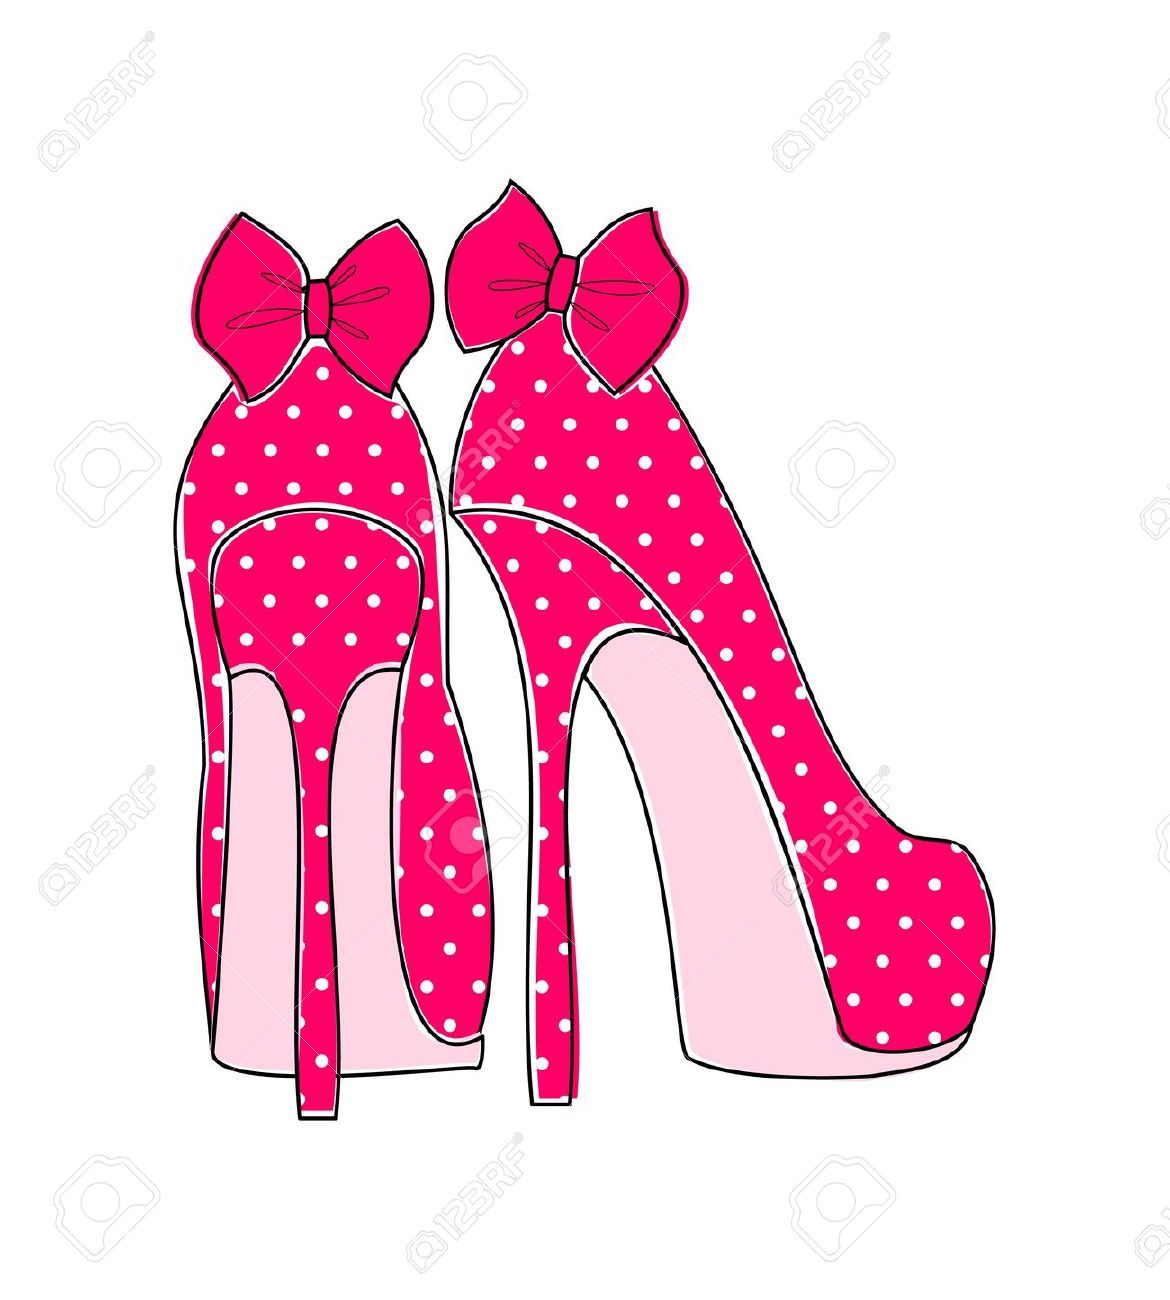 Shoe Cliparts, Stock Vector And Royalty Free Shoe.